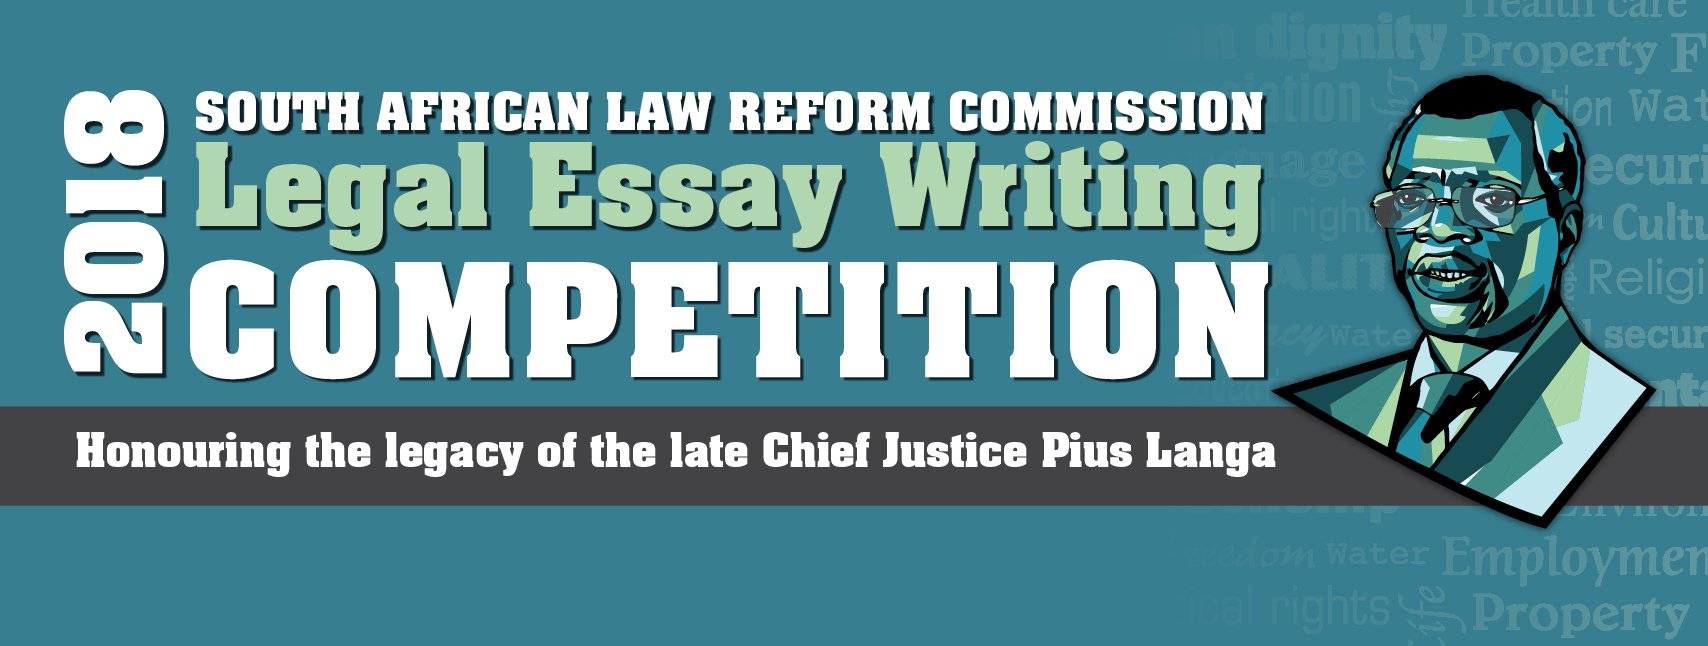 South African Law Reform Commission Legal Essay Competition